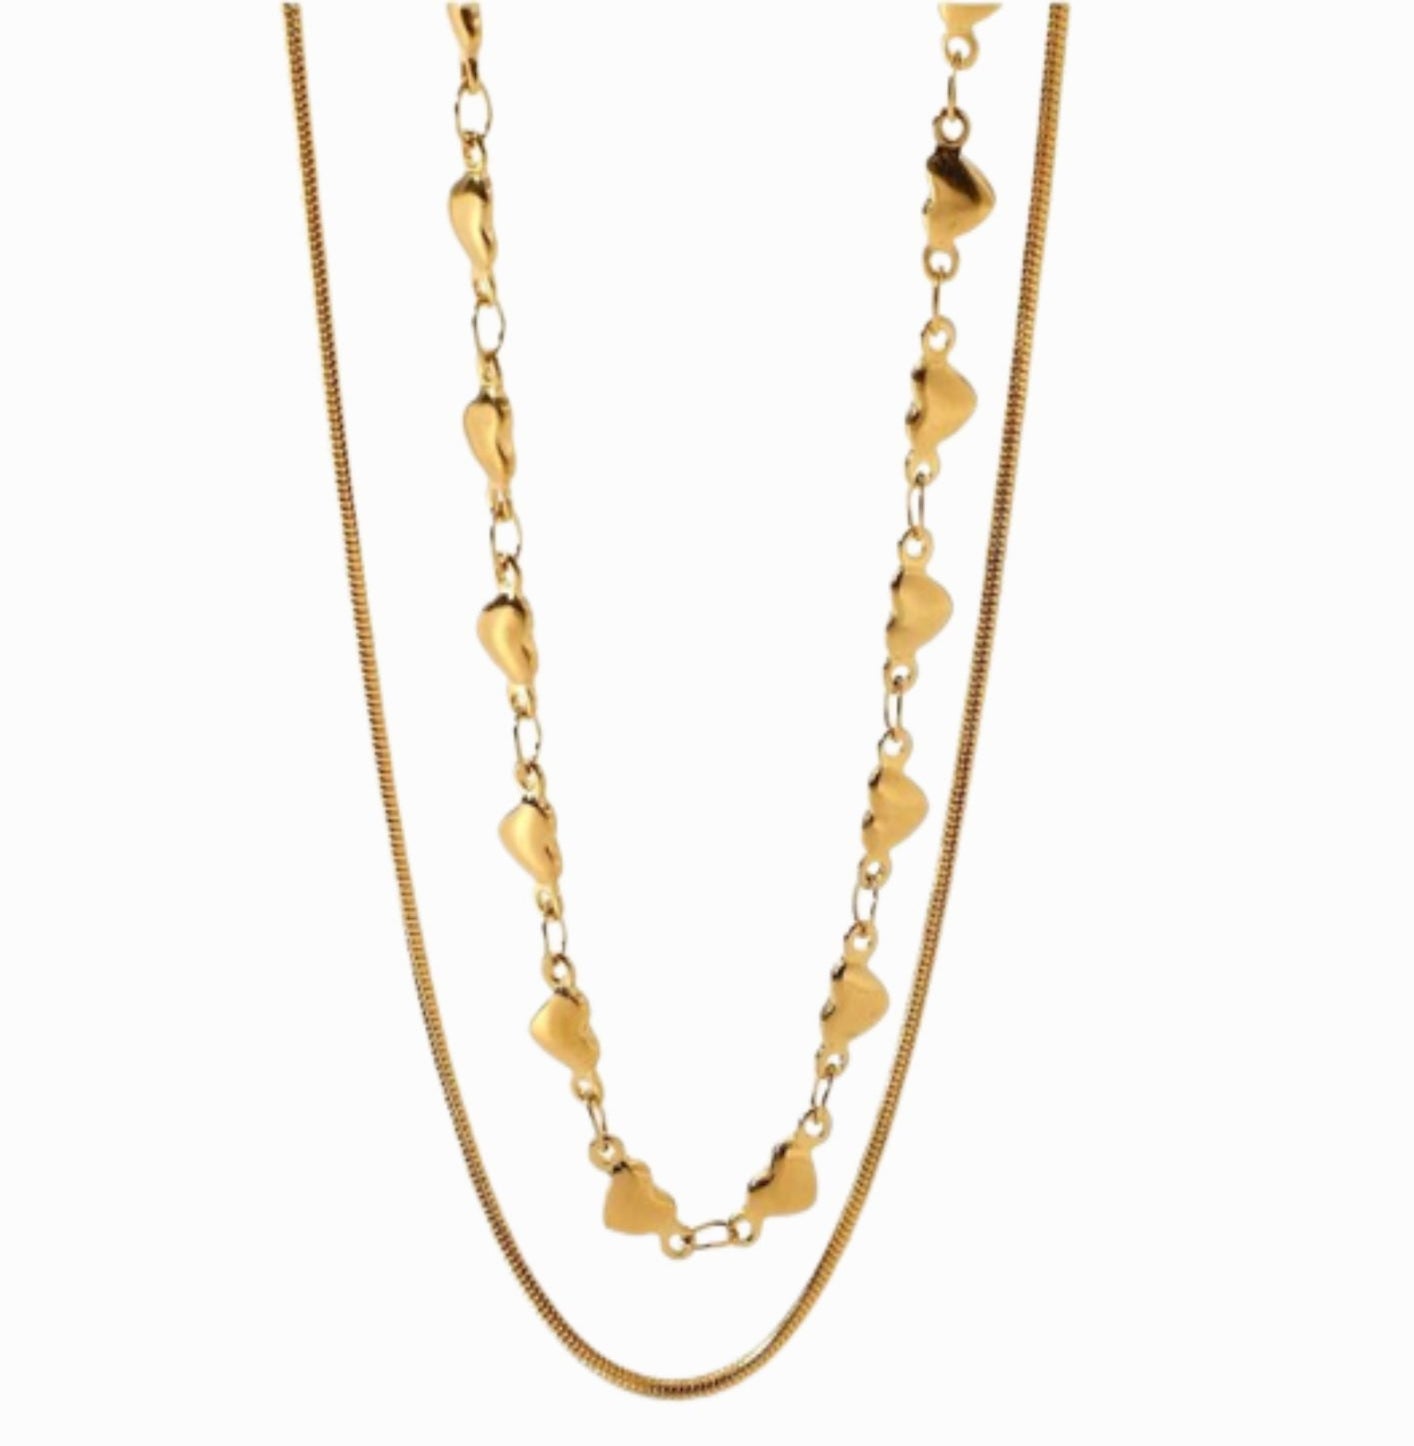 CAMILLE HEART NECKLACE neck Yubama Jewelry Online Store - The Elegant Designs of Gold and Silver ! 